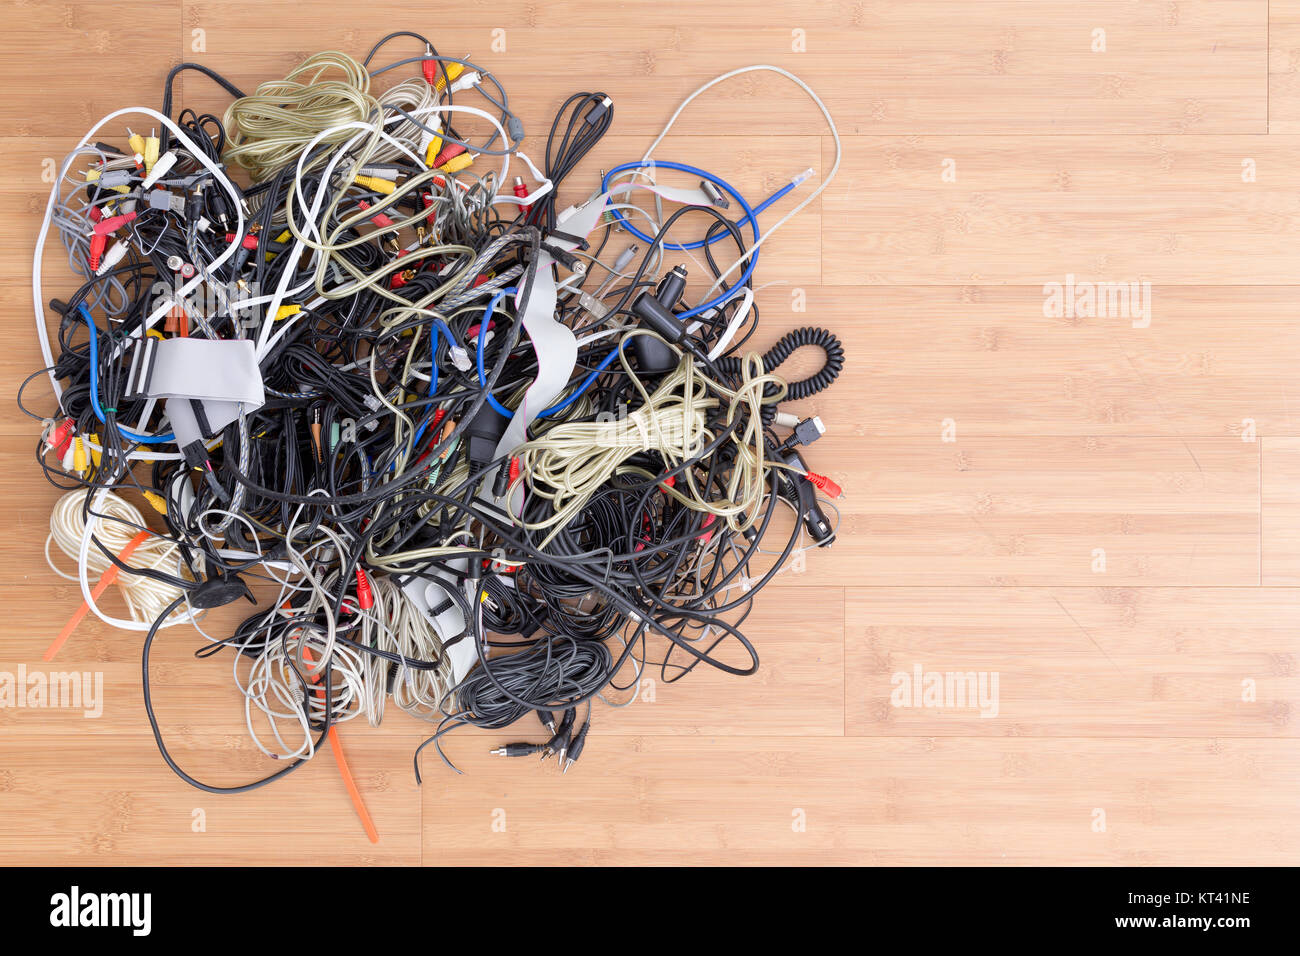 Messy tangle of old electric cords and connectors awaiting discard on a wooden surface with copy space in an overhead view Stock Photo